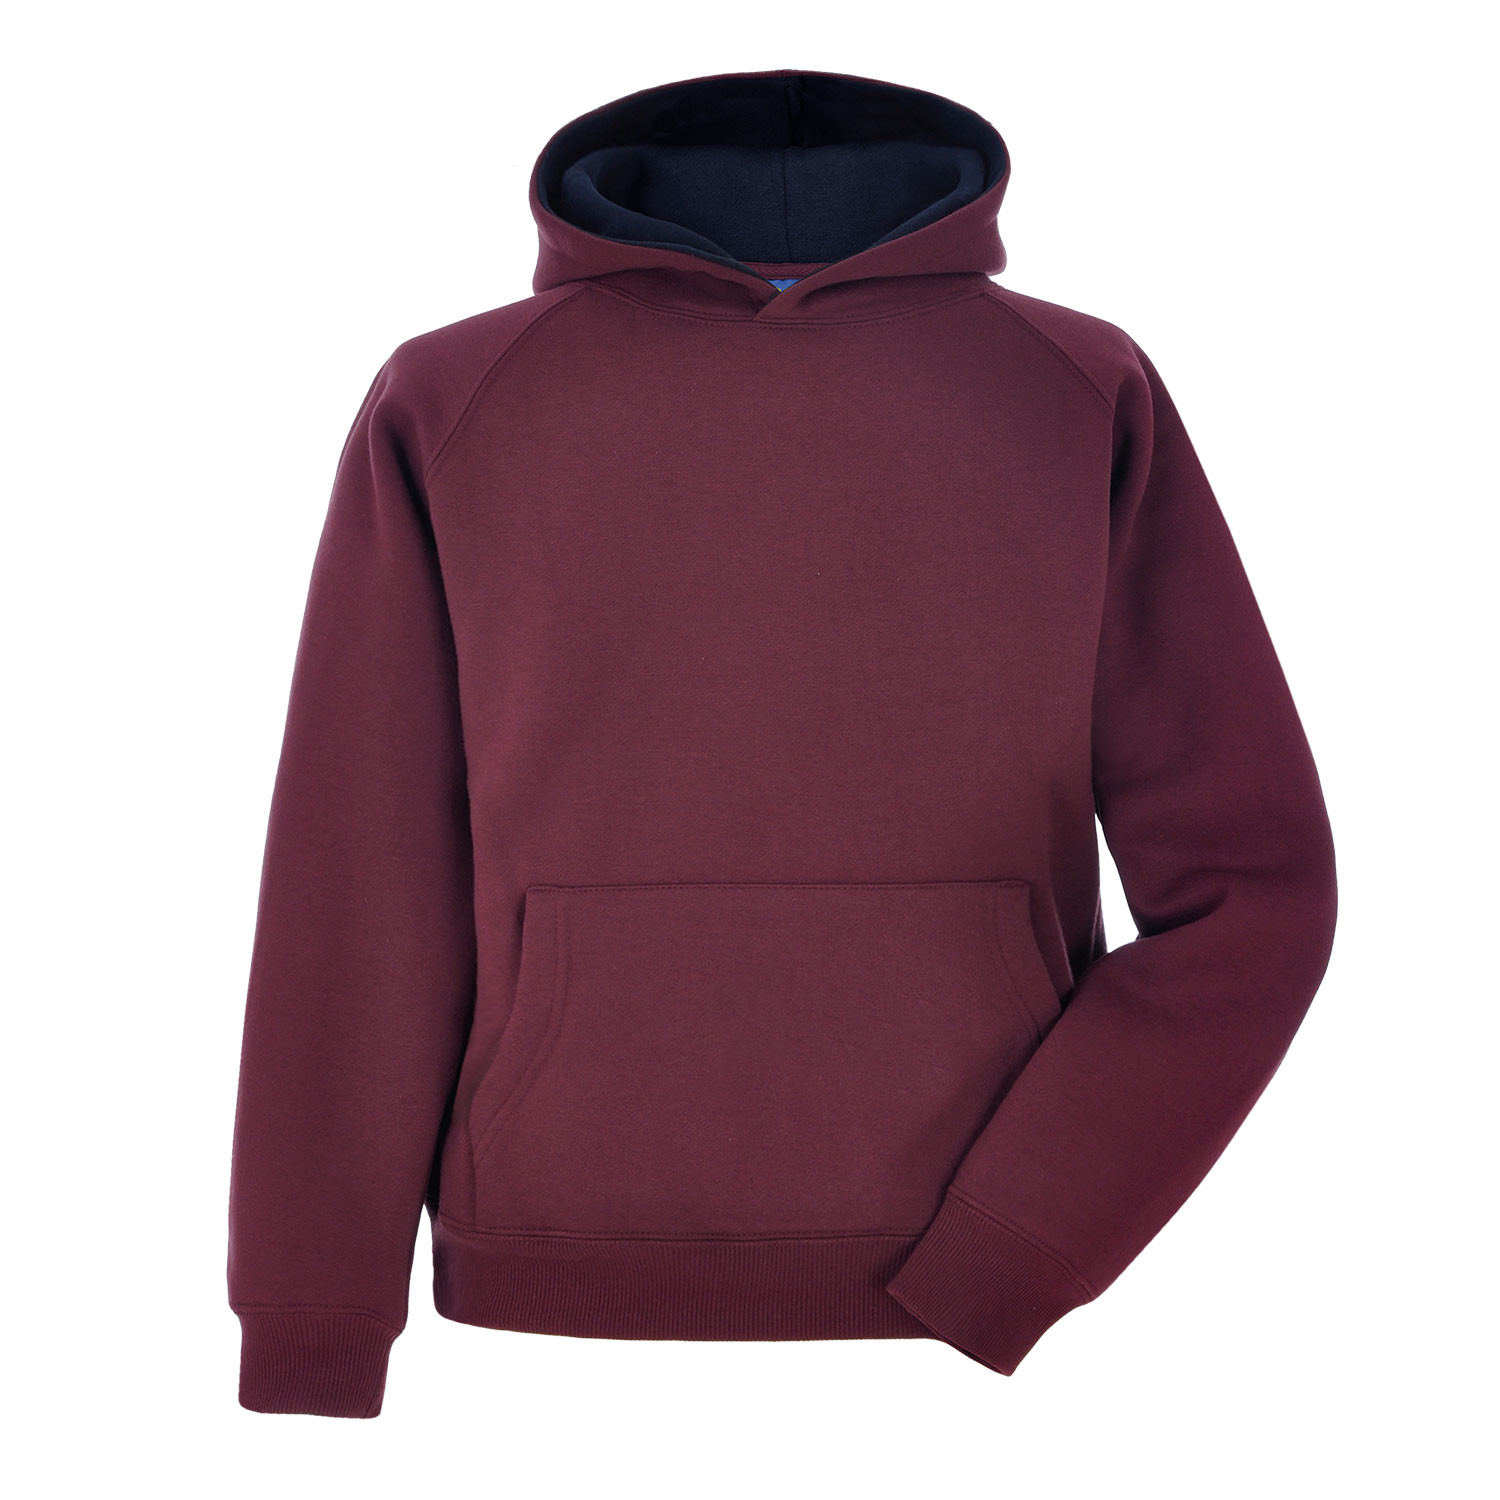 Burgundy /Navy Hooded Top with Logo - Age 11-12